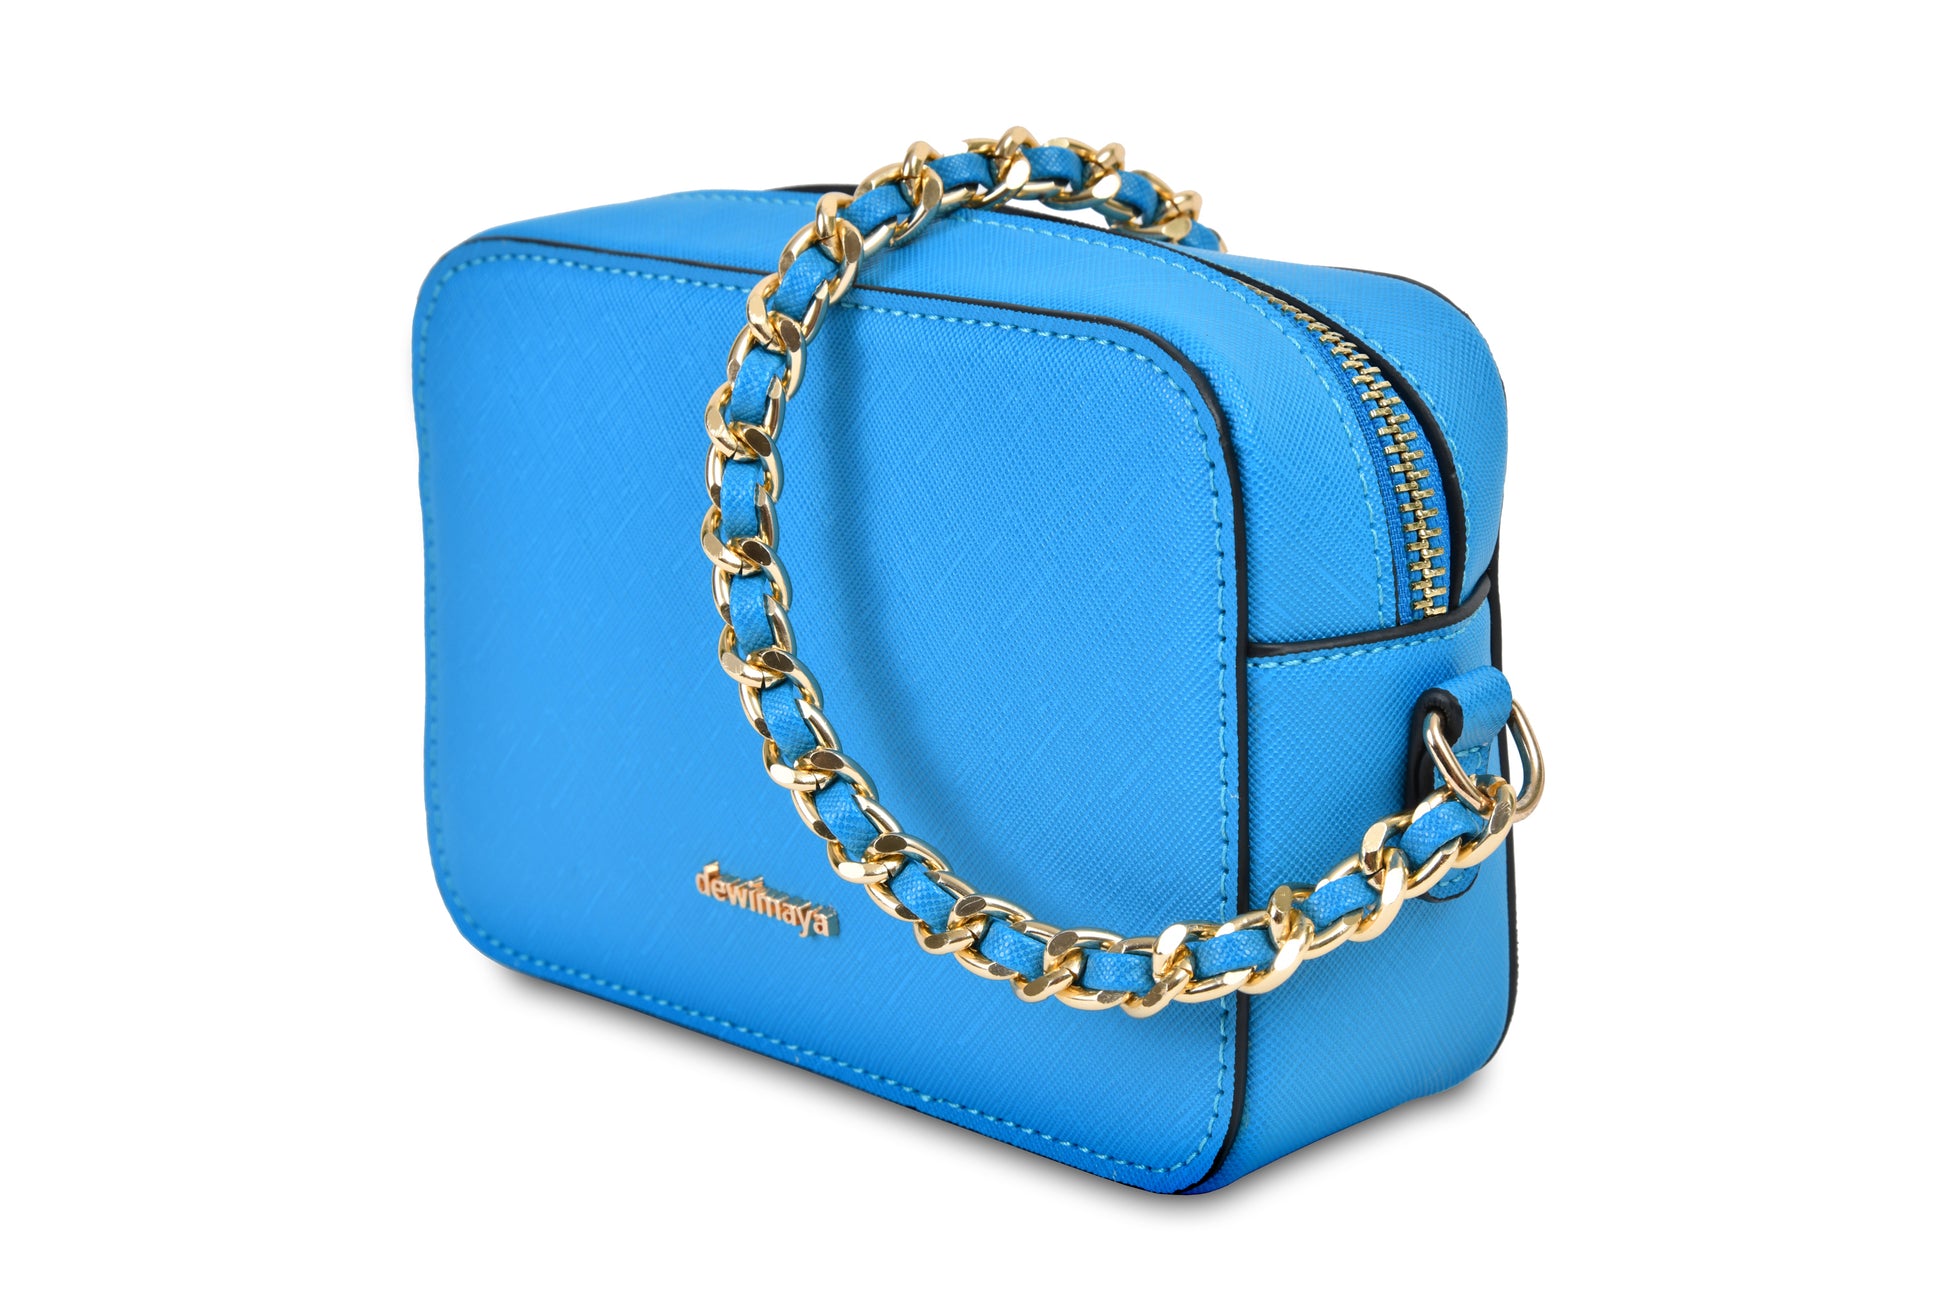 Chloe Blue Handbag made by Dewi Maya with gold shoulder strap chain available at the best boutique in Upstate South Carolina Spartanburg Greenville Dewi Maya Boutique